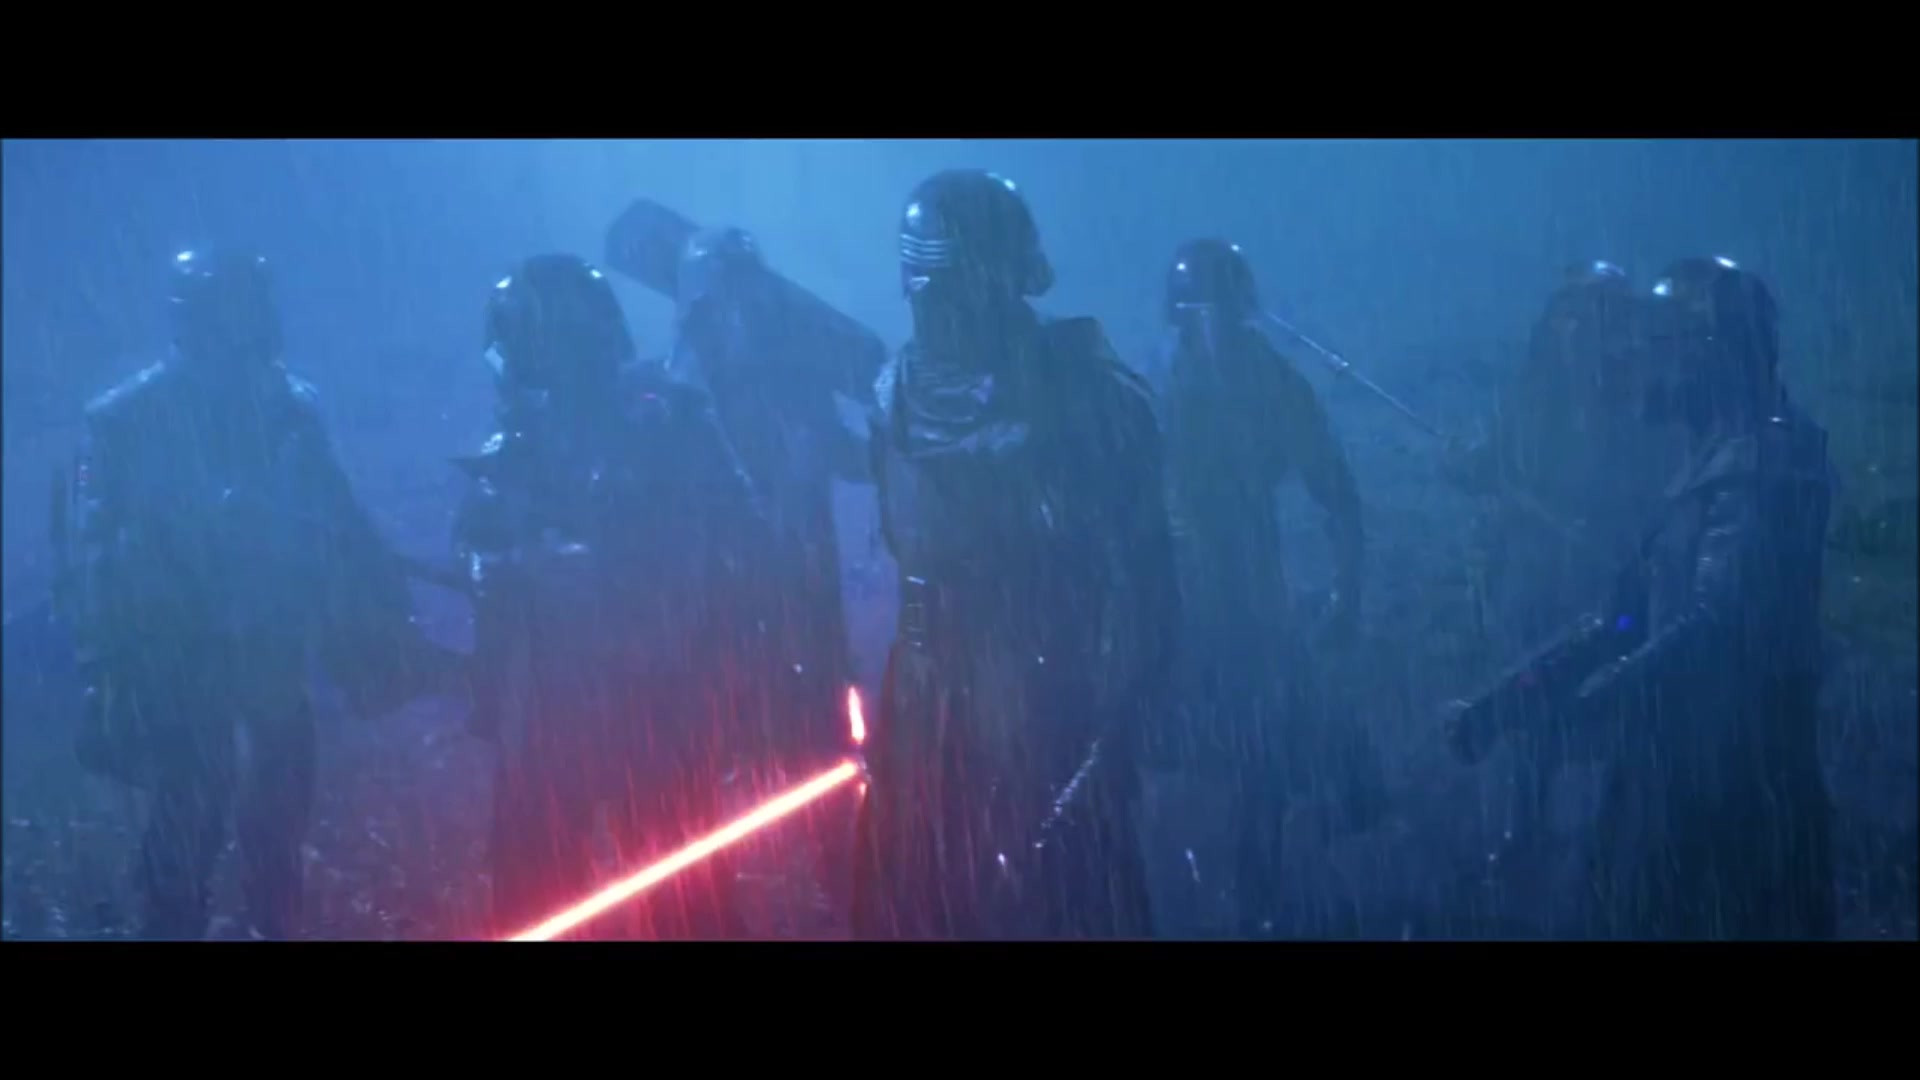 Can anyone make this wallpaper worthy Kylo Ren and his entourage from Episode 7s third trailer